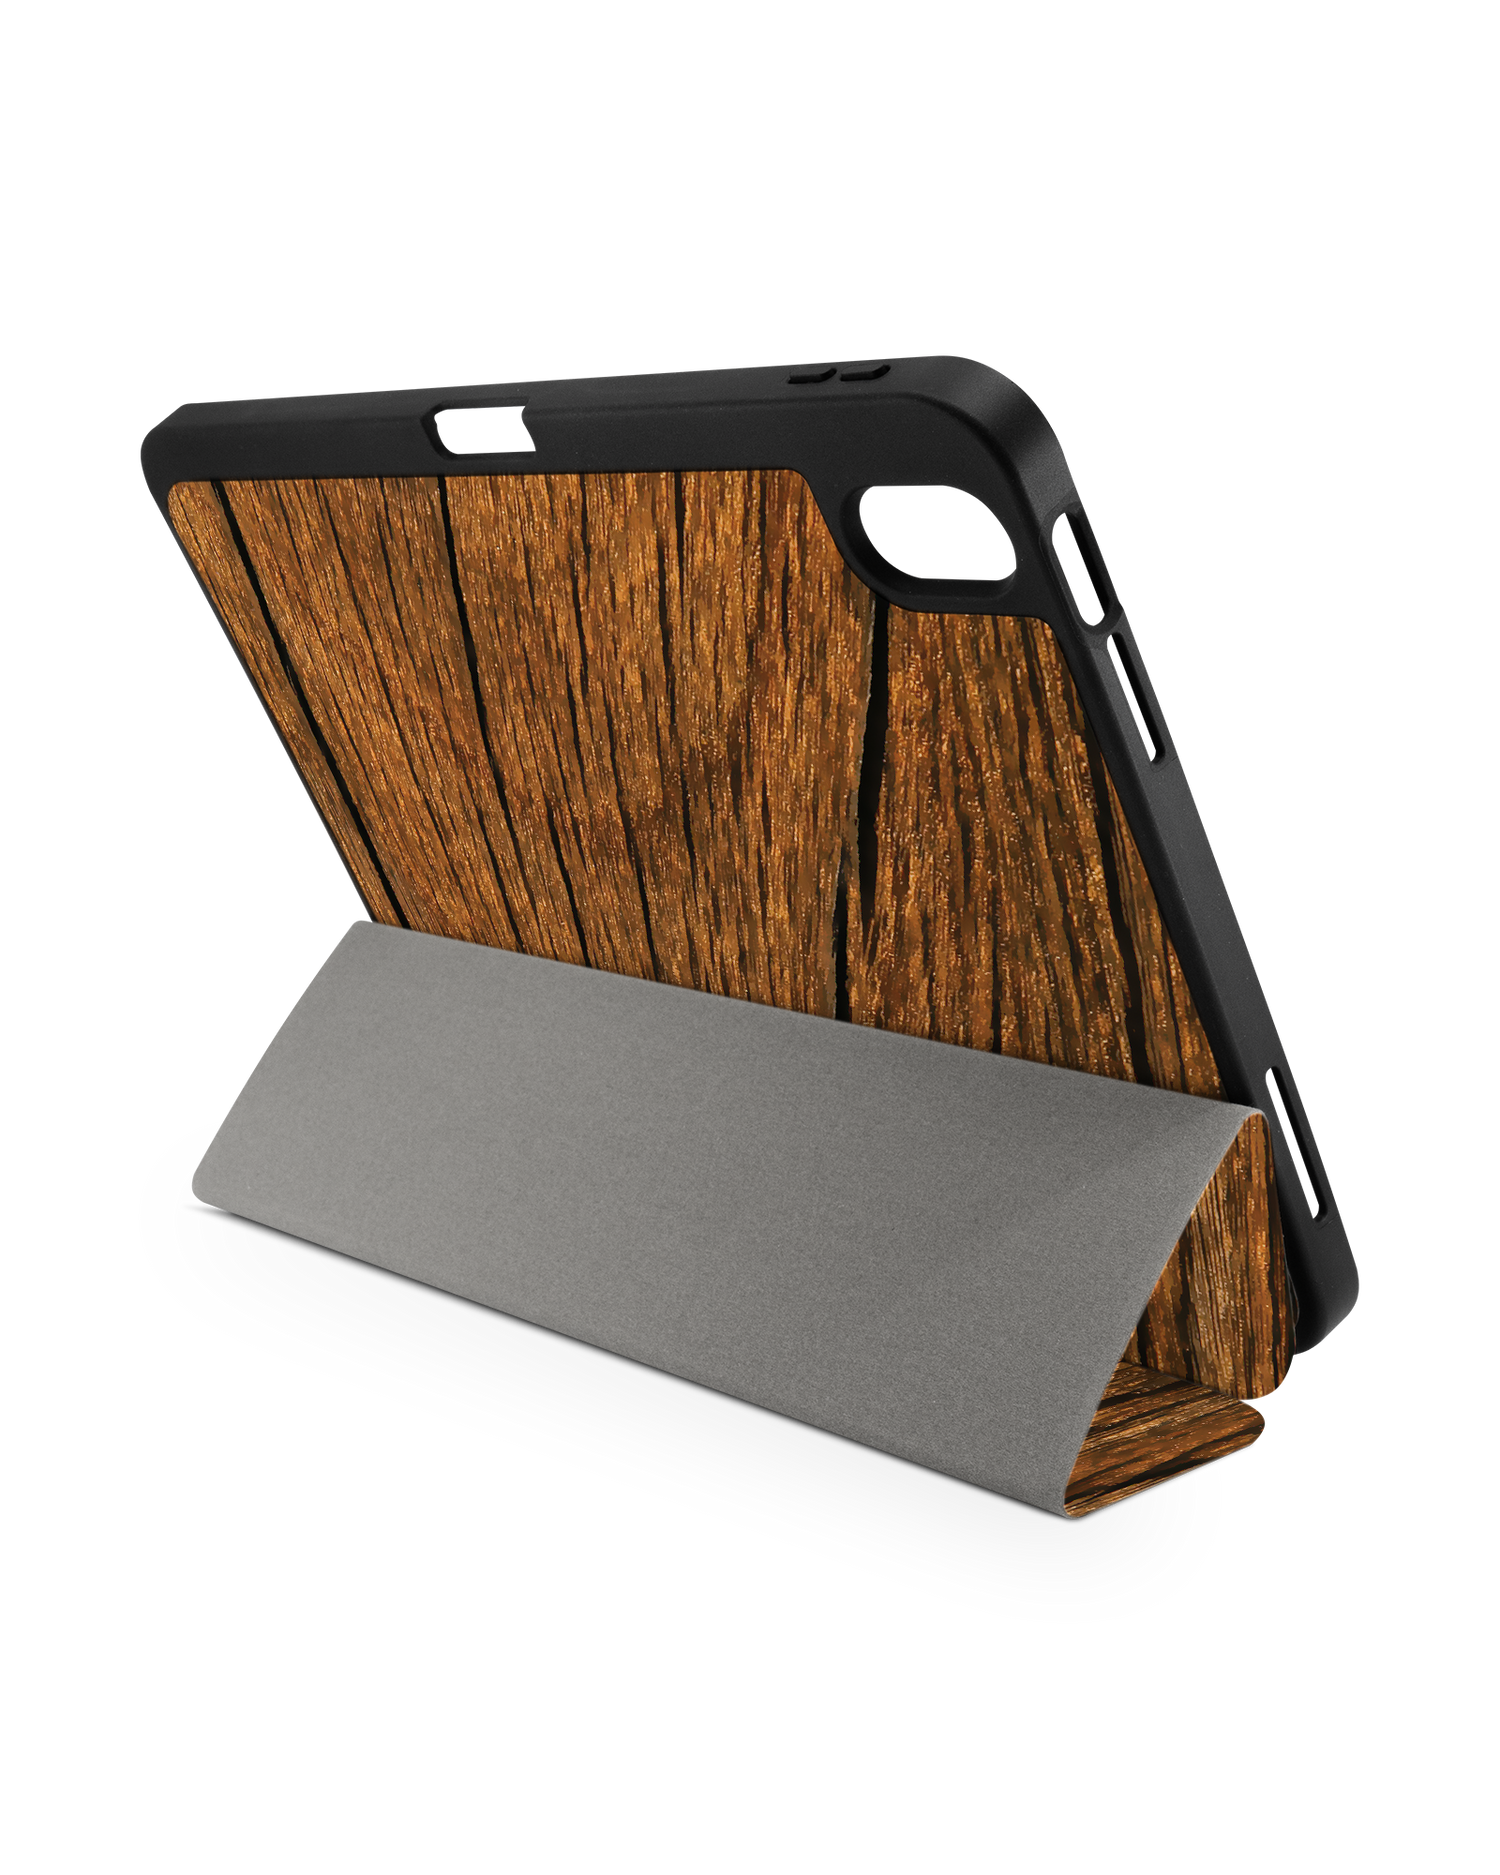 Wood iPad Case with Pencil Holder for Apple iPad (10th Generation): Set up in landscape format (back view)